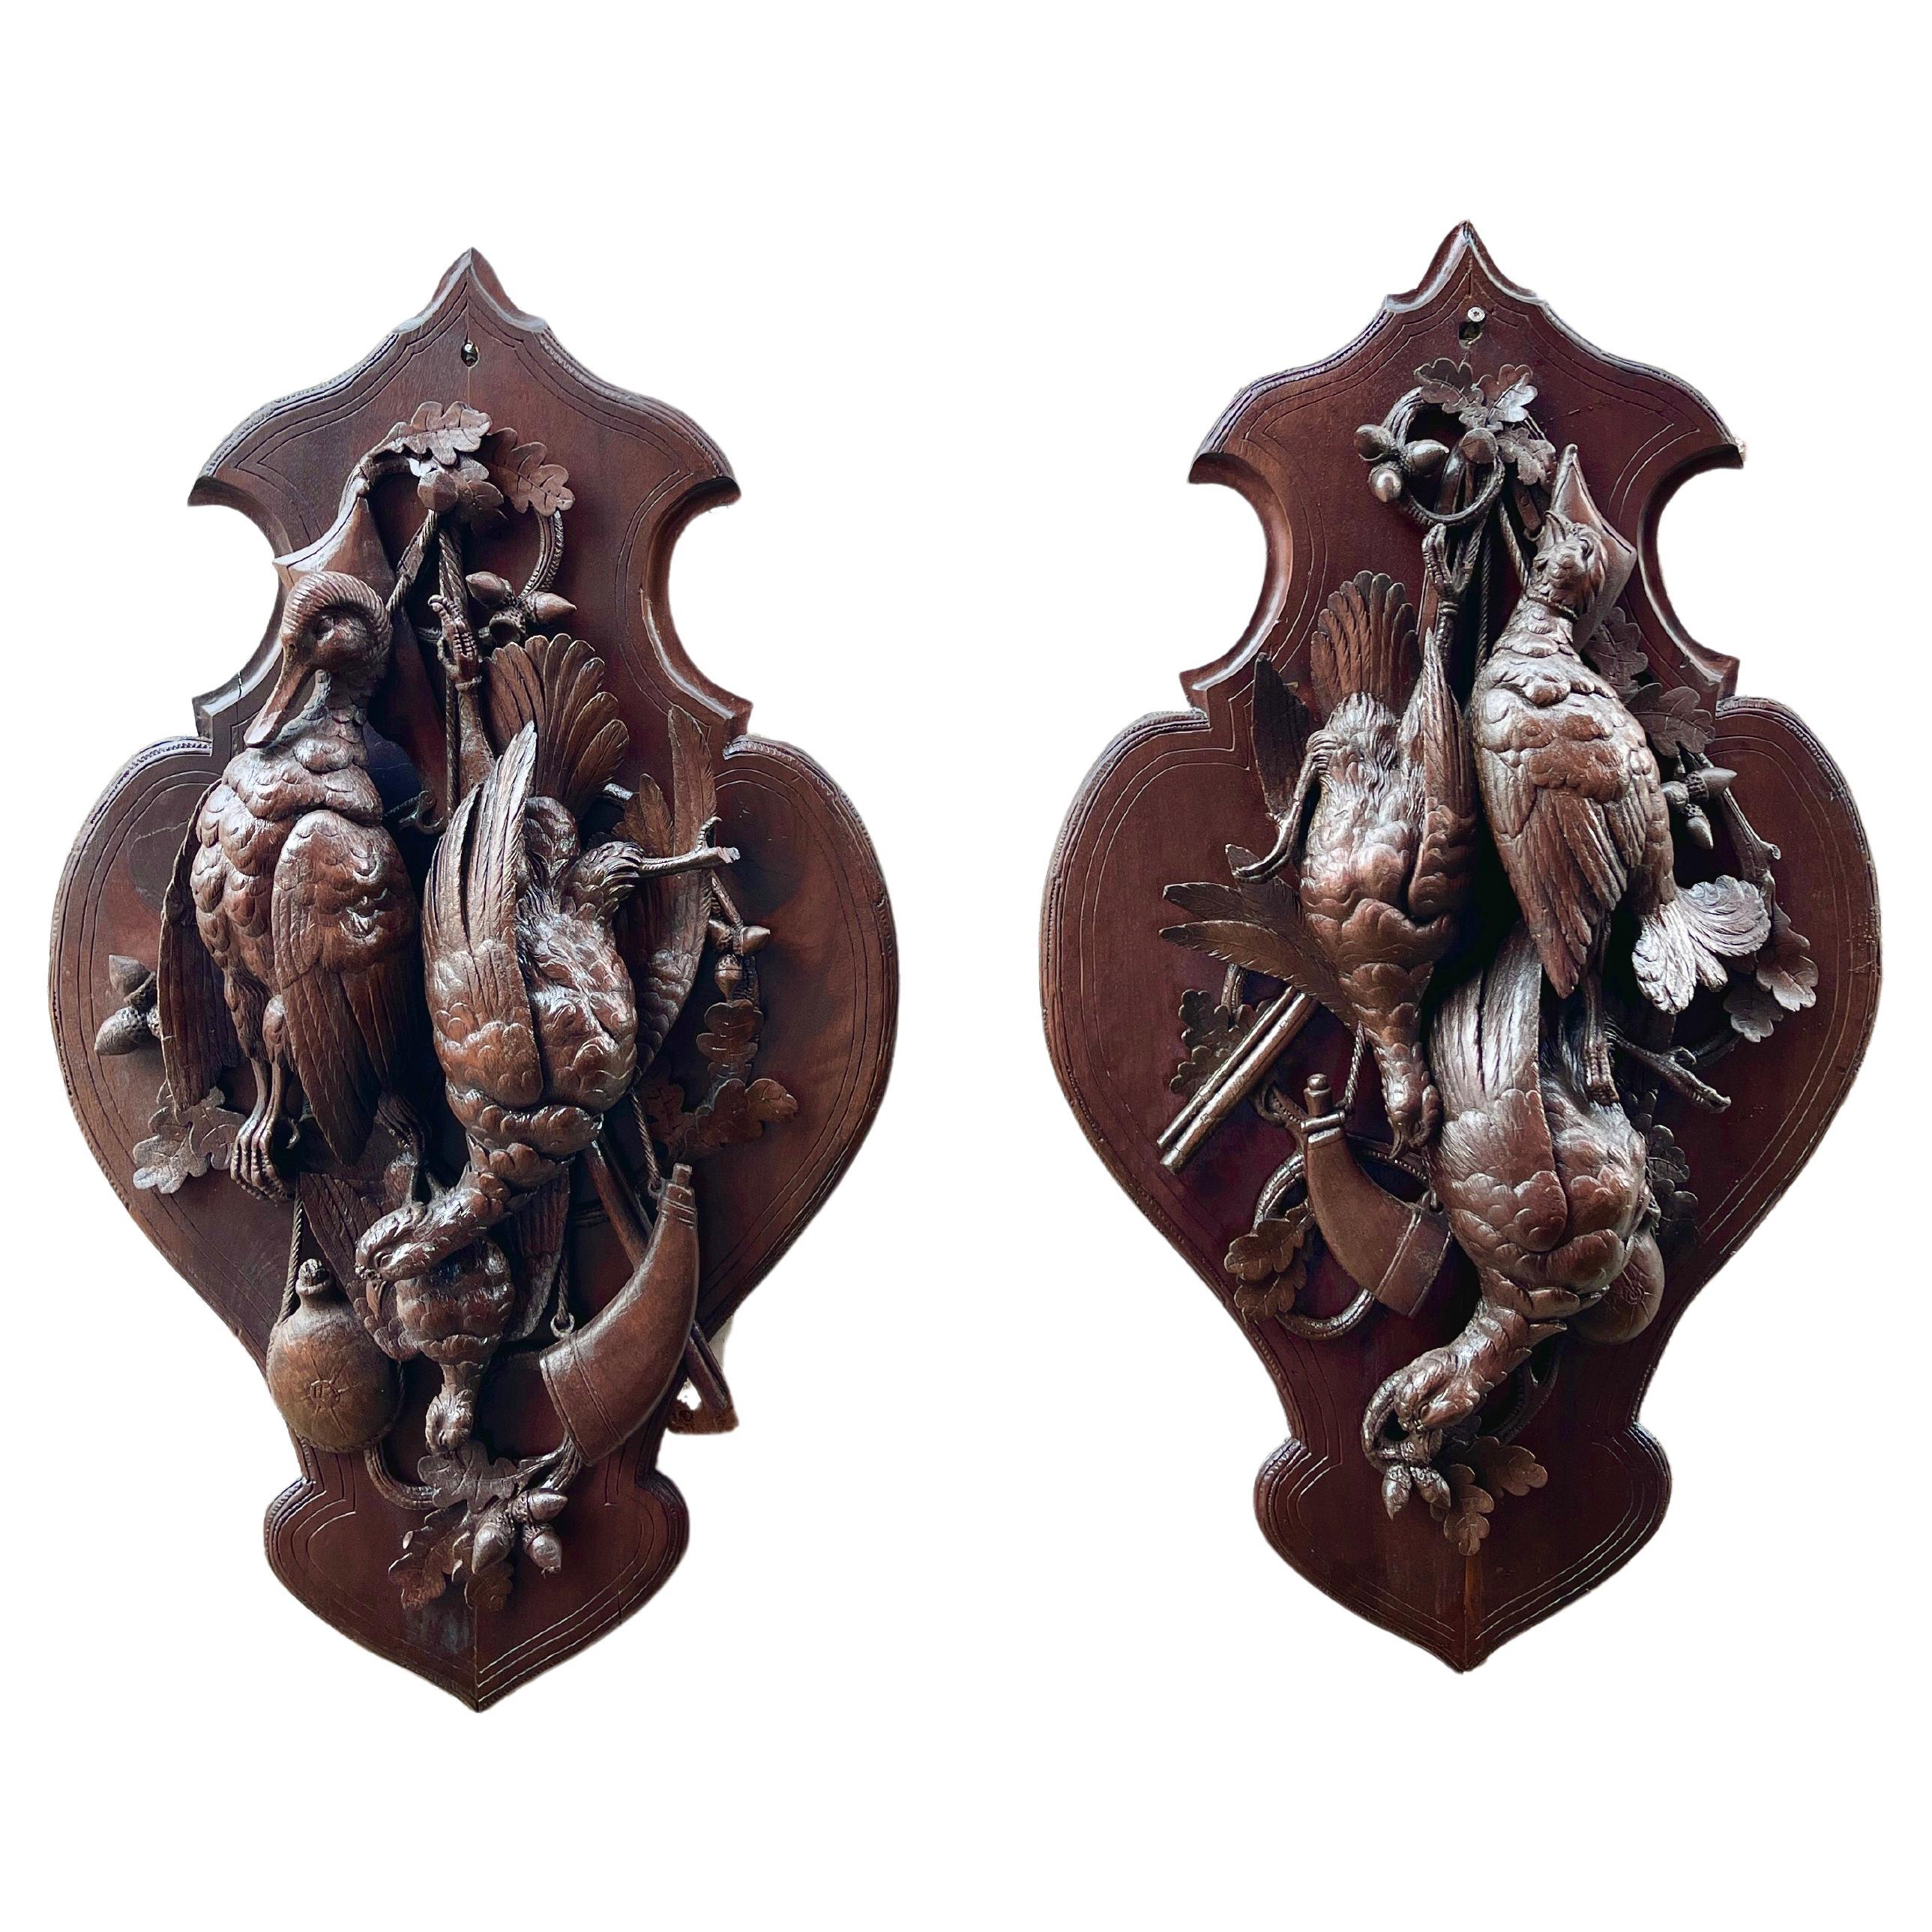 Pair of German Black Forest Game Plaques, 19th Century, wood carvings